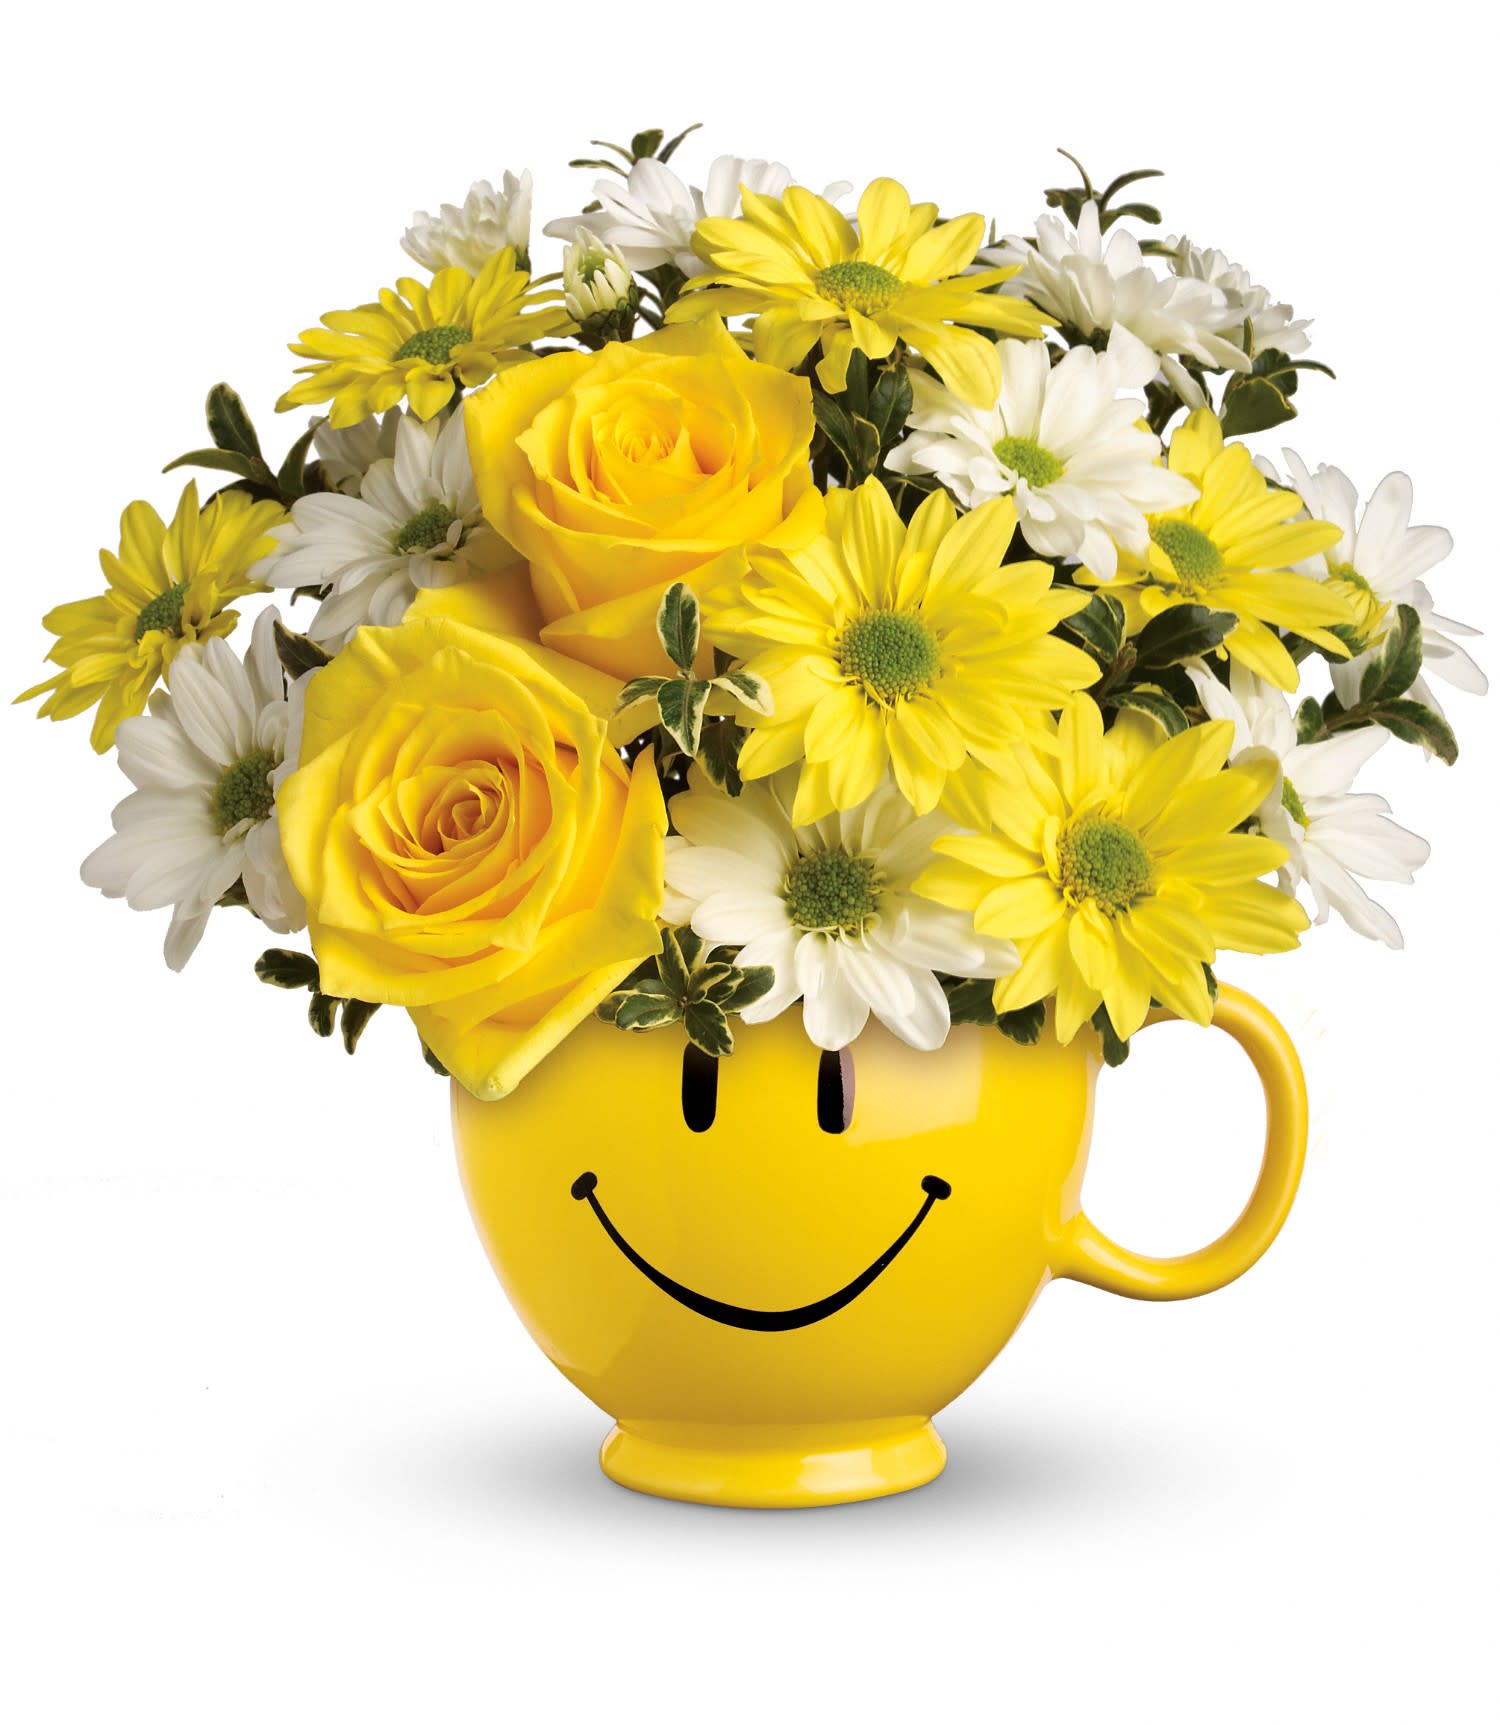 Teleflora's Be Happy Bouquet With Roses - There are probably a million reasons this is such a popular bouquet. Of course, there are probably just as many reasons to send this cheerful arrangement. Full of happy flowers, this ceramic happy face mug will bring smiles for years to come. Especially when filled with that first cup of morning coffee or cocoa!